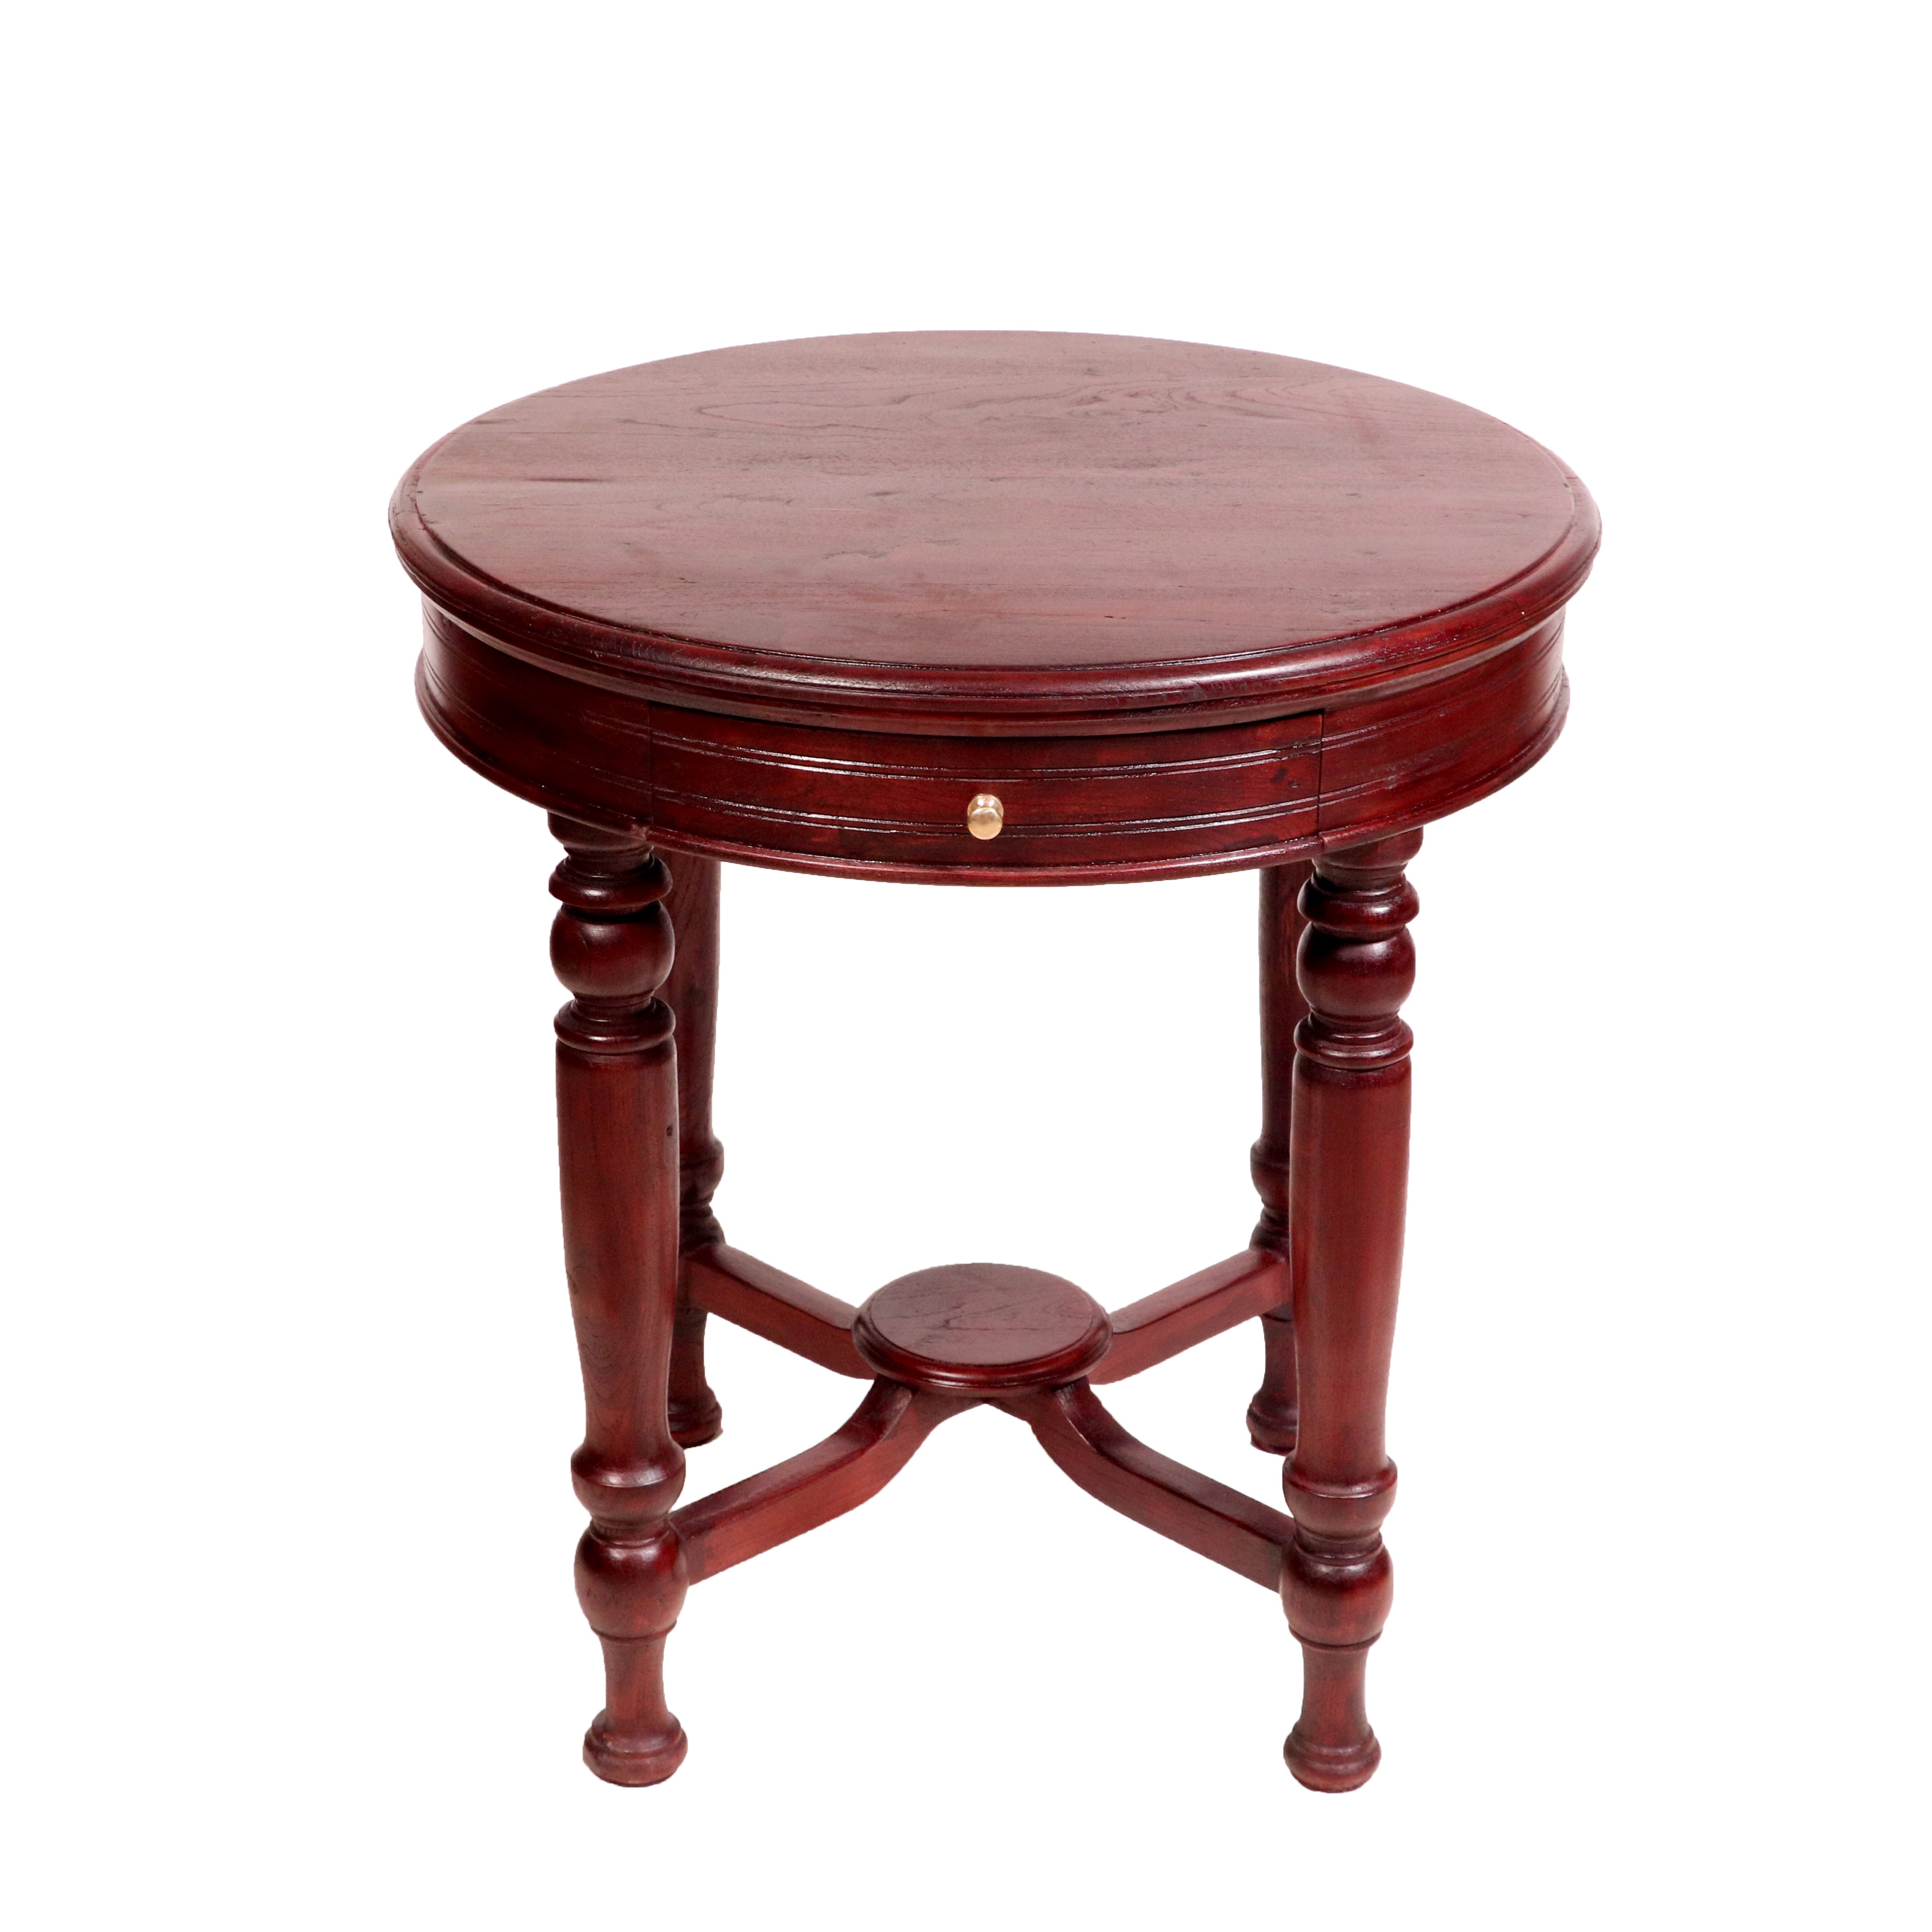 Classic Teak round Table with Drawer End Table